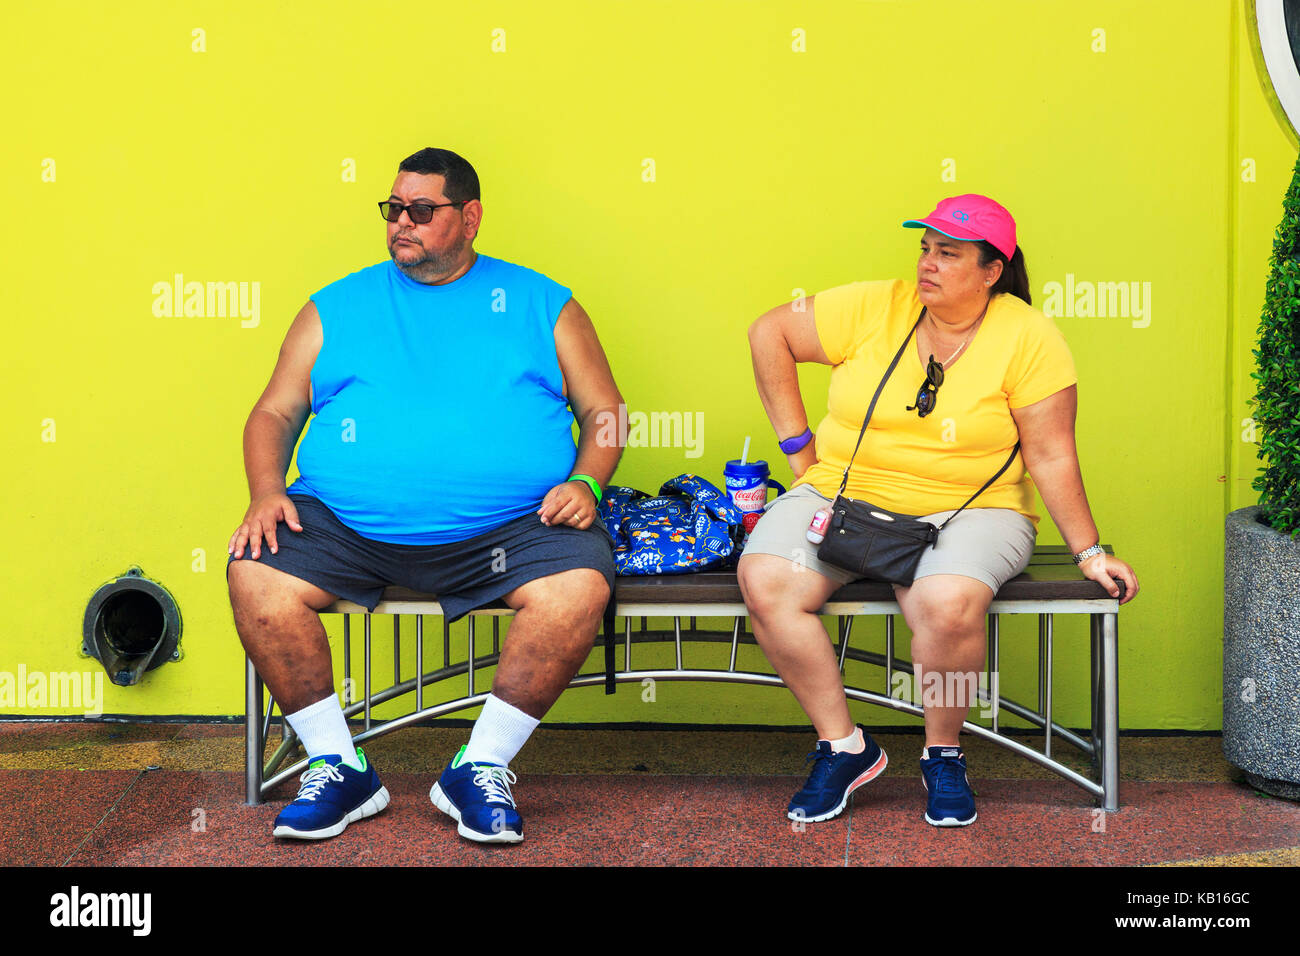 Overweight man and woman sitting on a bench, Orlando, Florida, USA Stock Photo